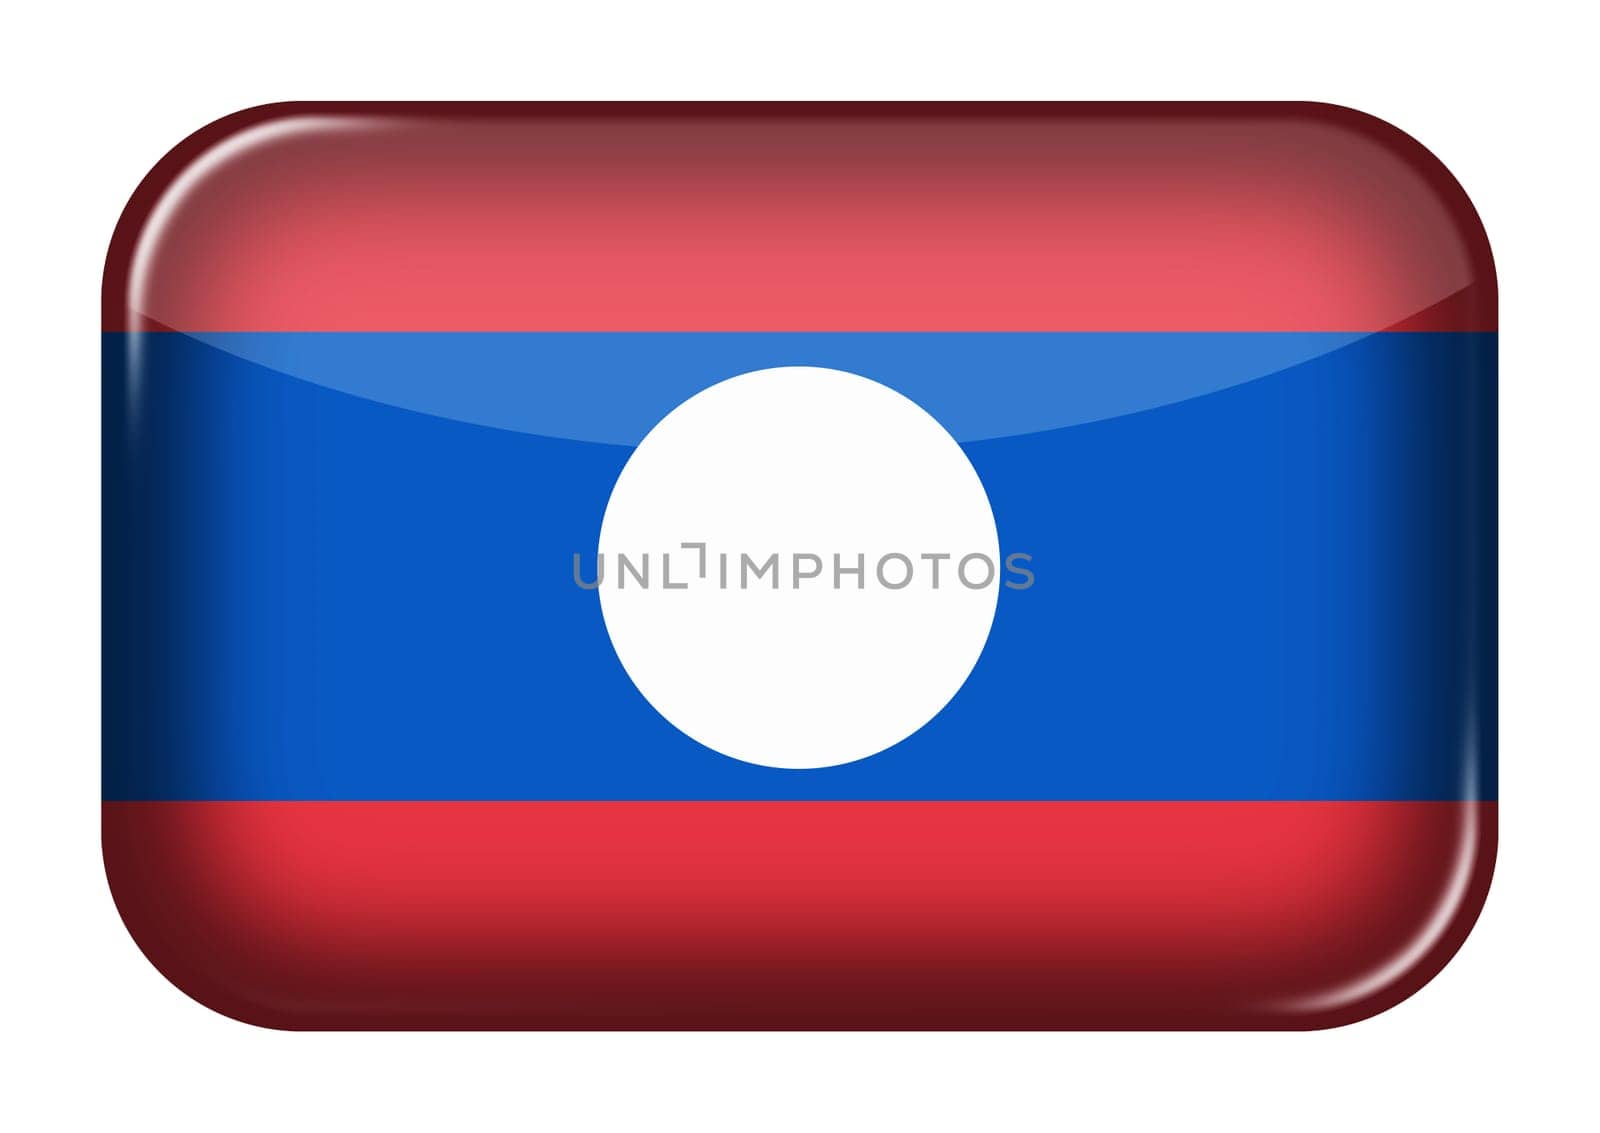 Laos web icon rectangle button with clipping path 3d illustration by VivacityImages